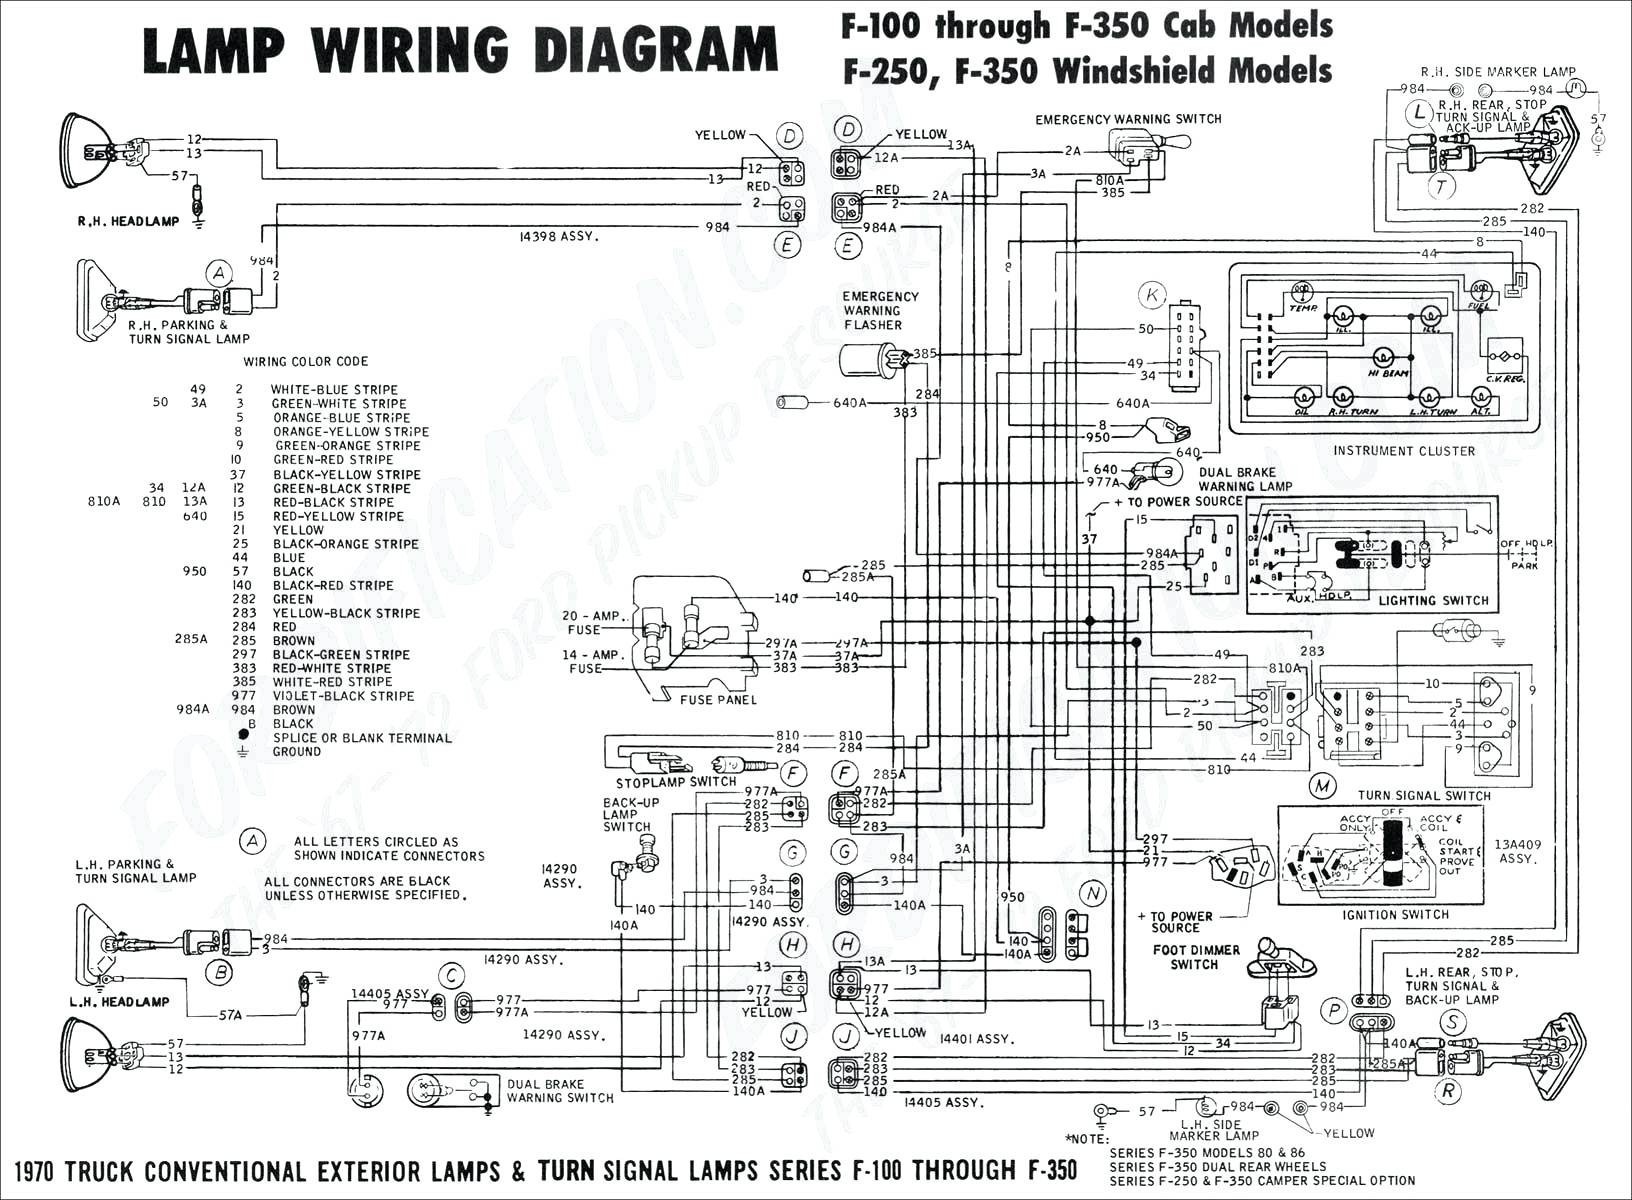 2000 Ford Taurus Fuel Pump Wiring Diagram Rate 98 Ford F250 Wiring Diagram Wire Data •